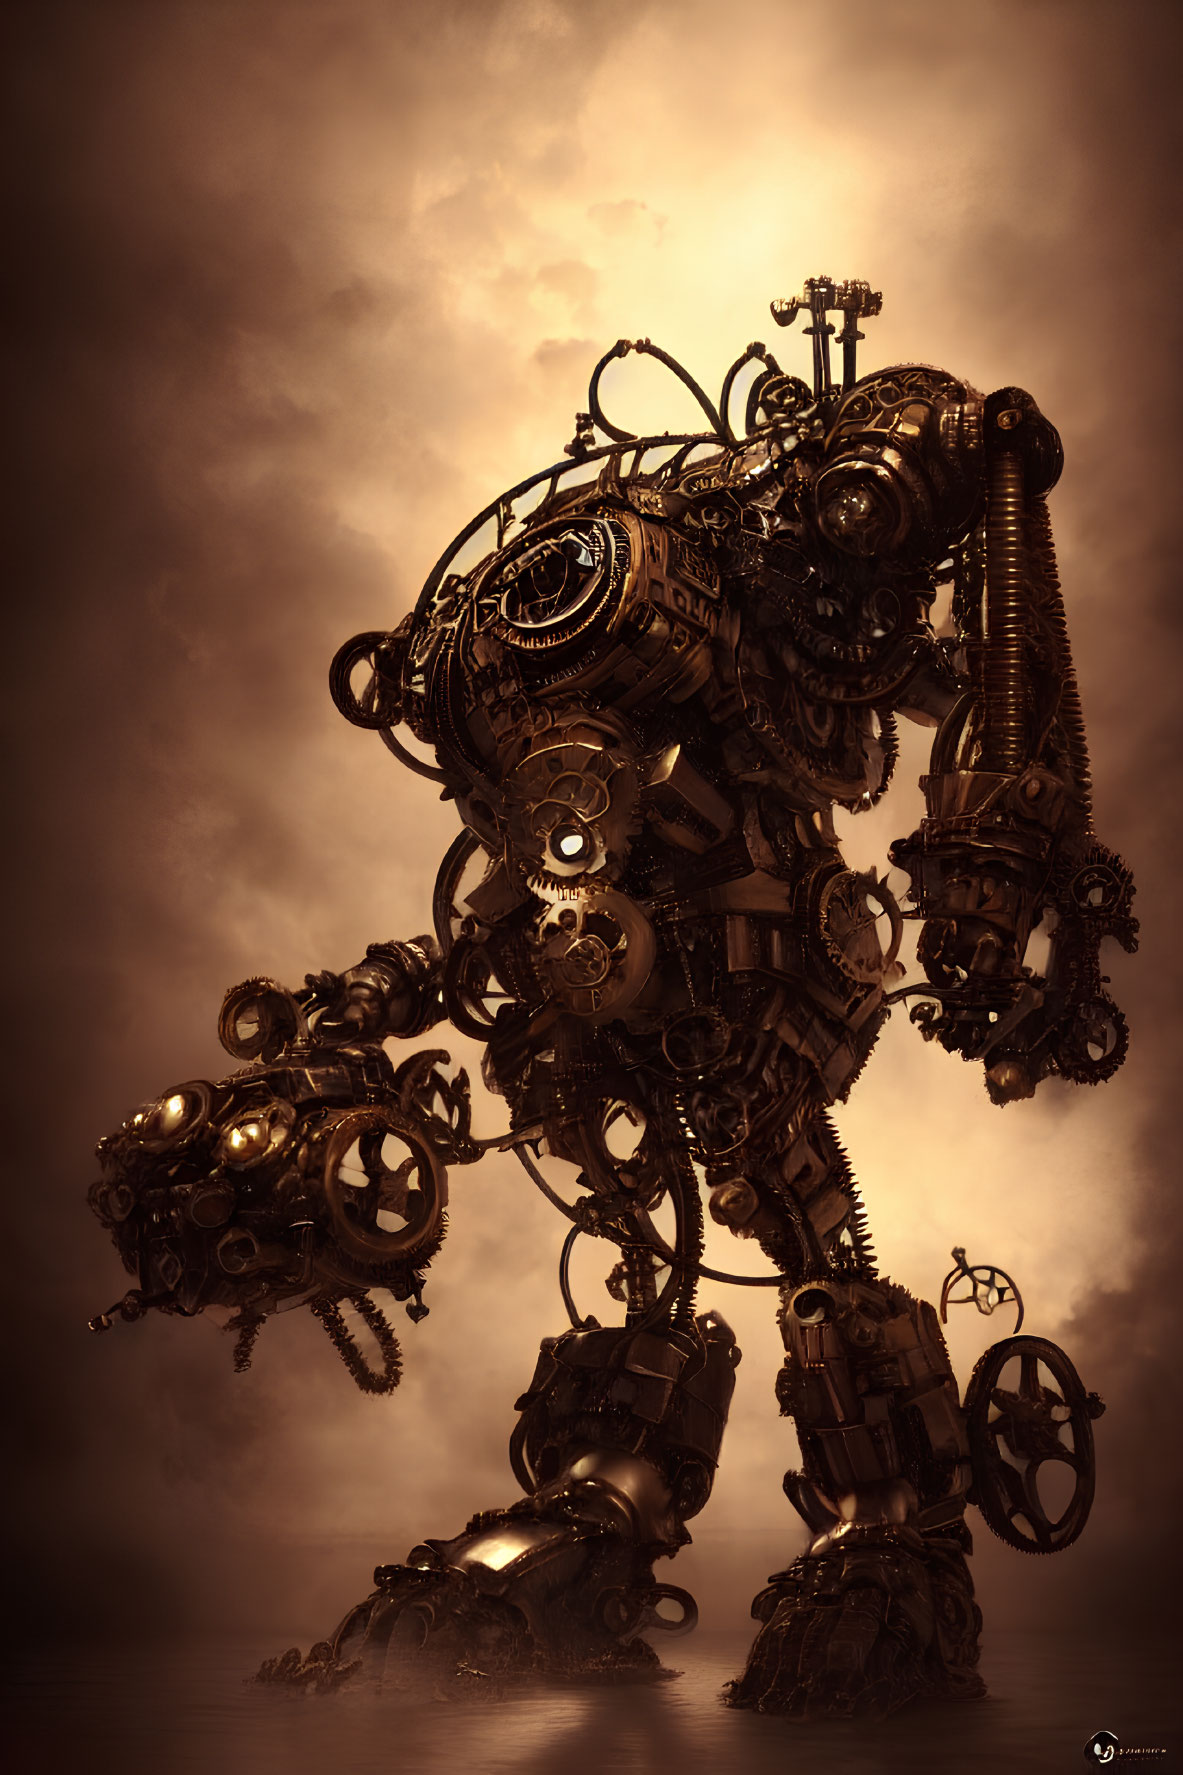 Steampunk-style robot with gears and cogs under dramatic sky